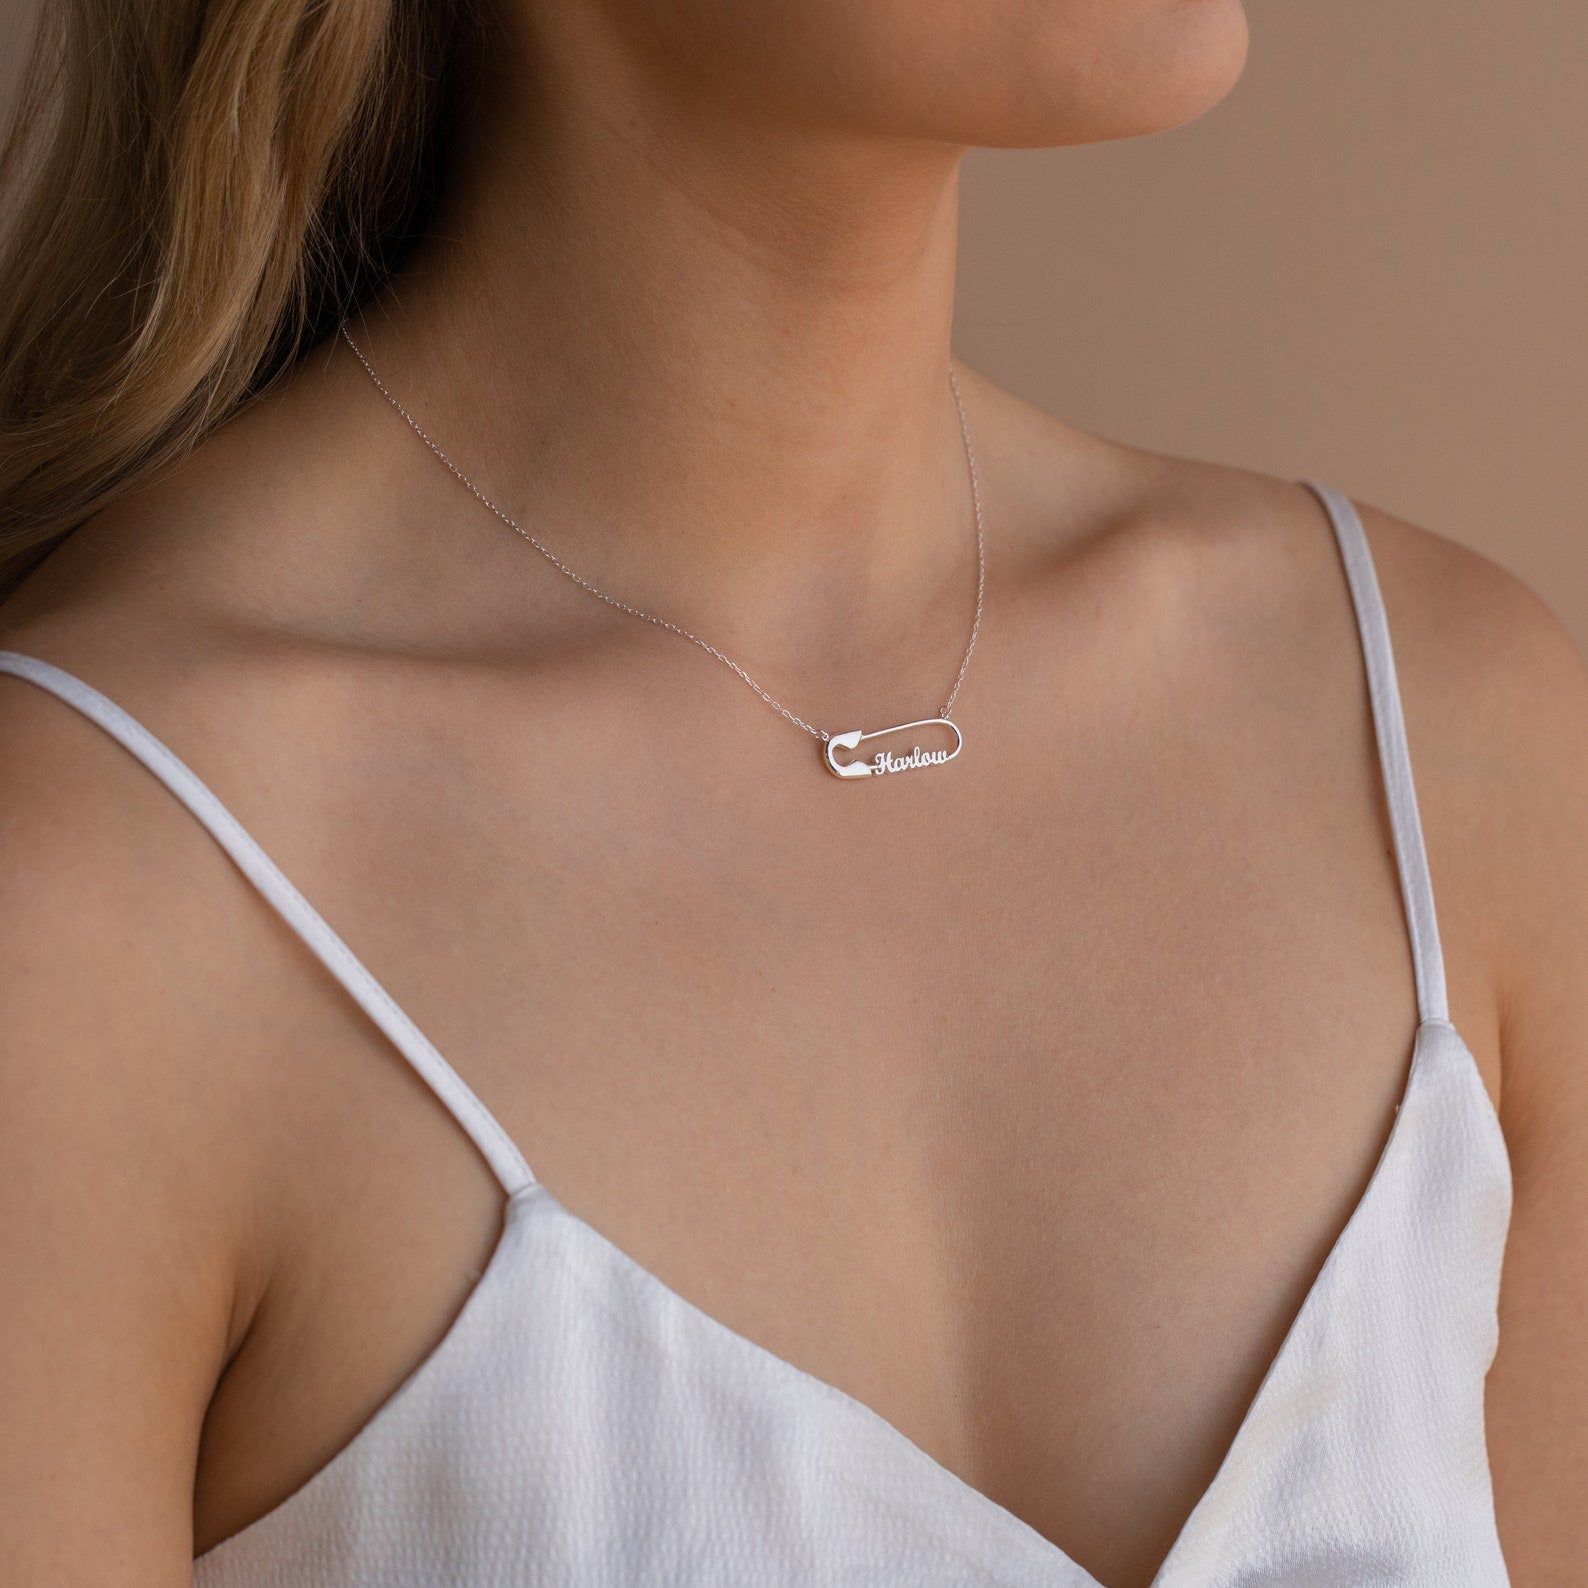 Safety Pin Name Necklace